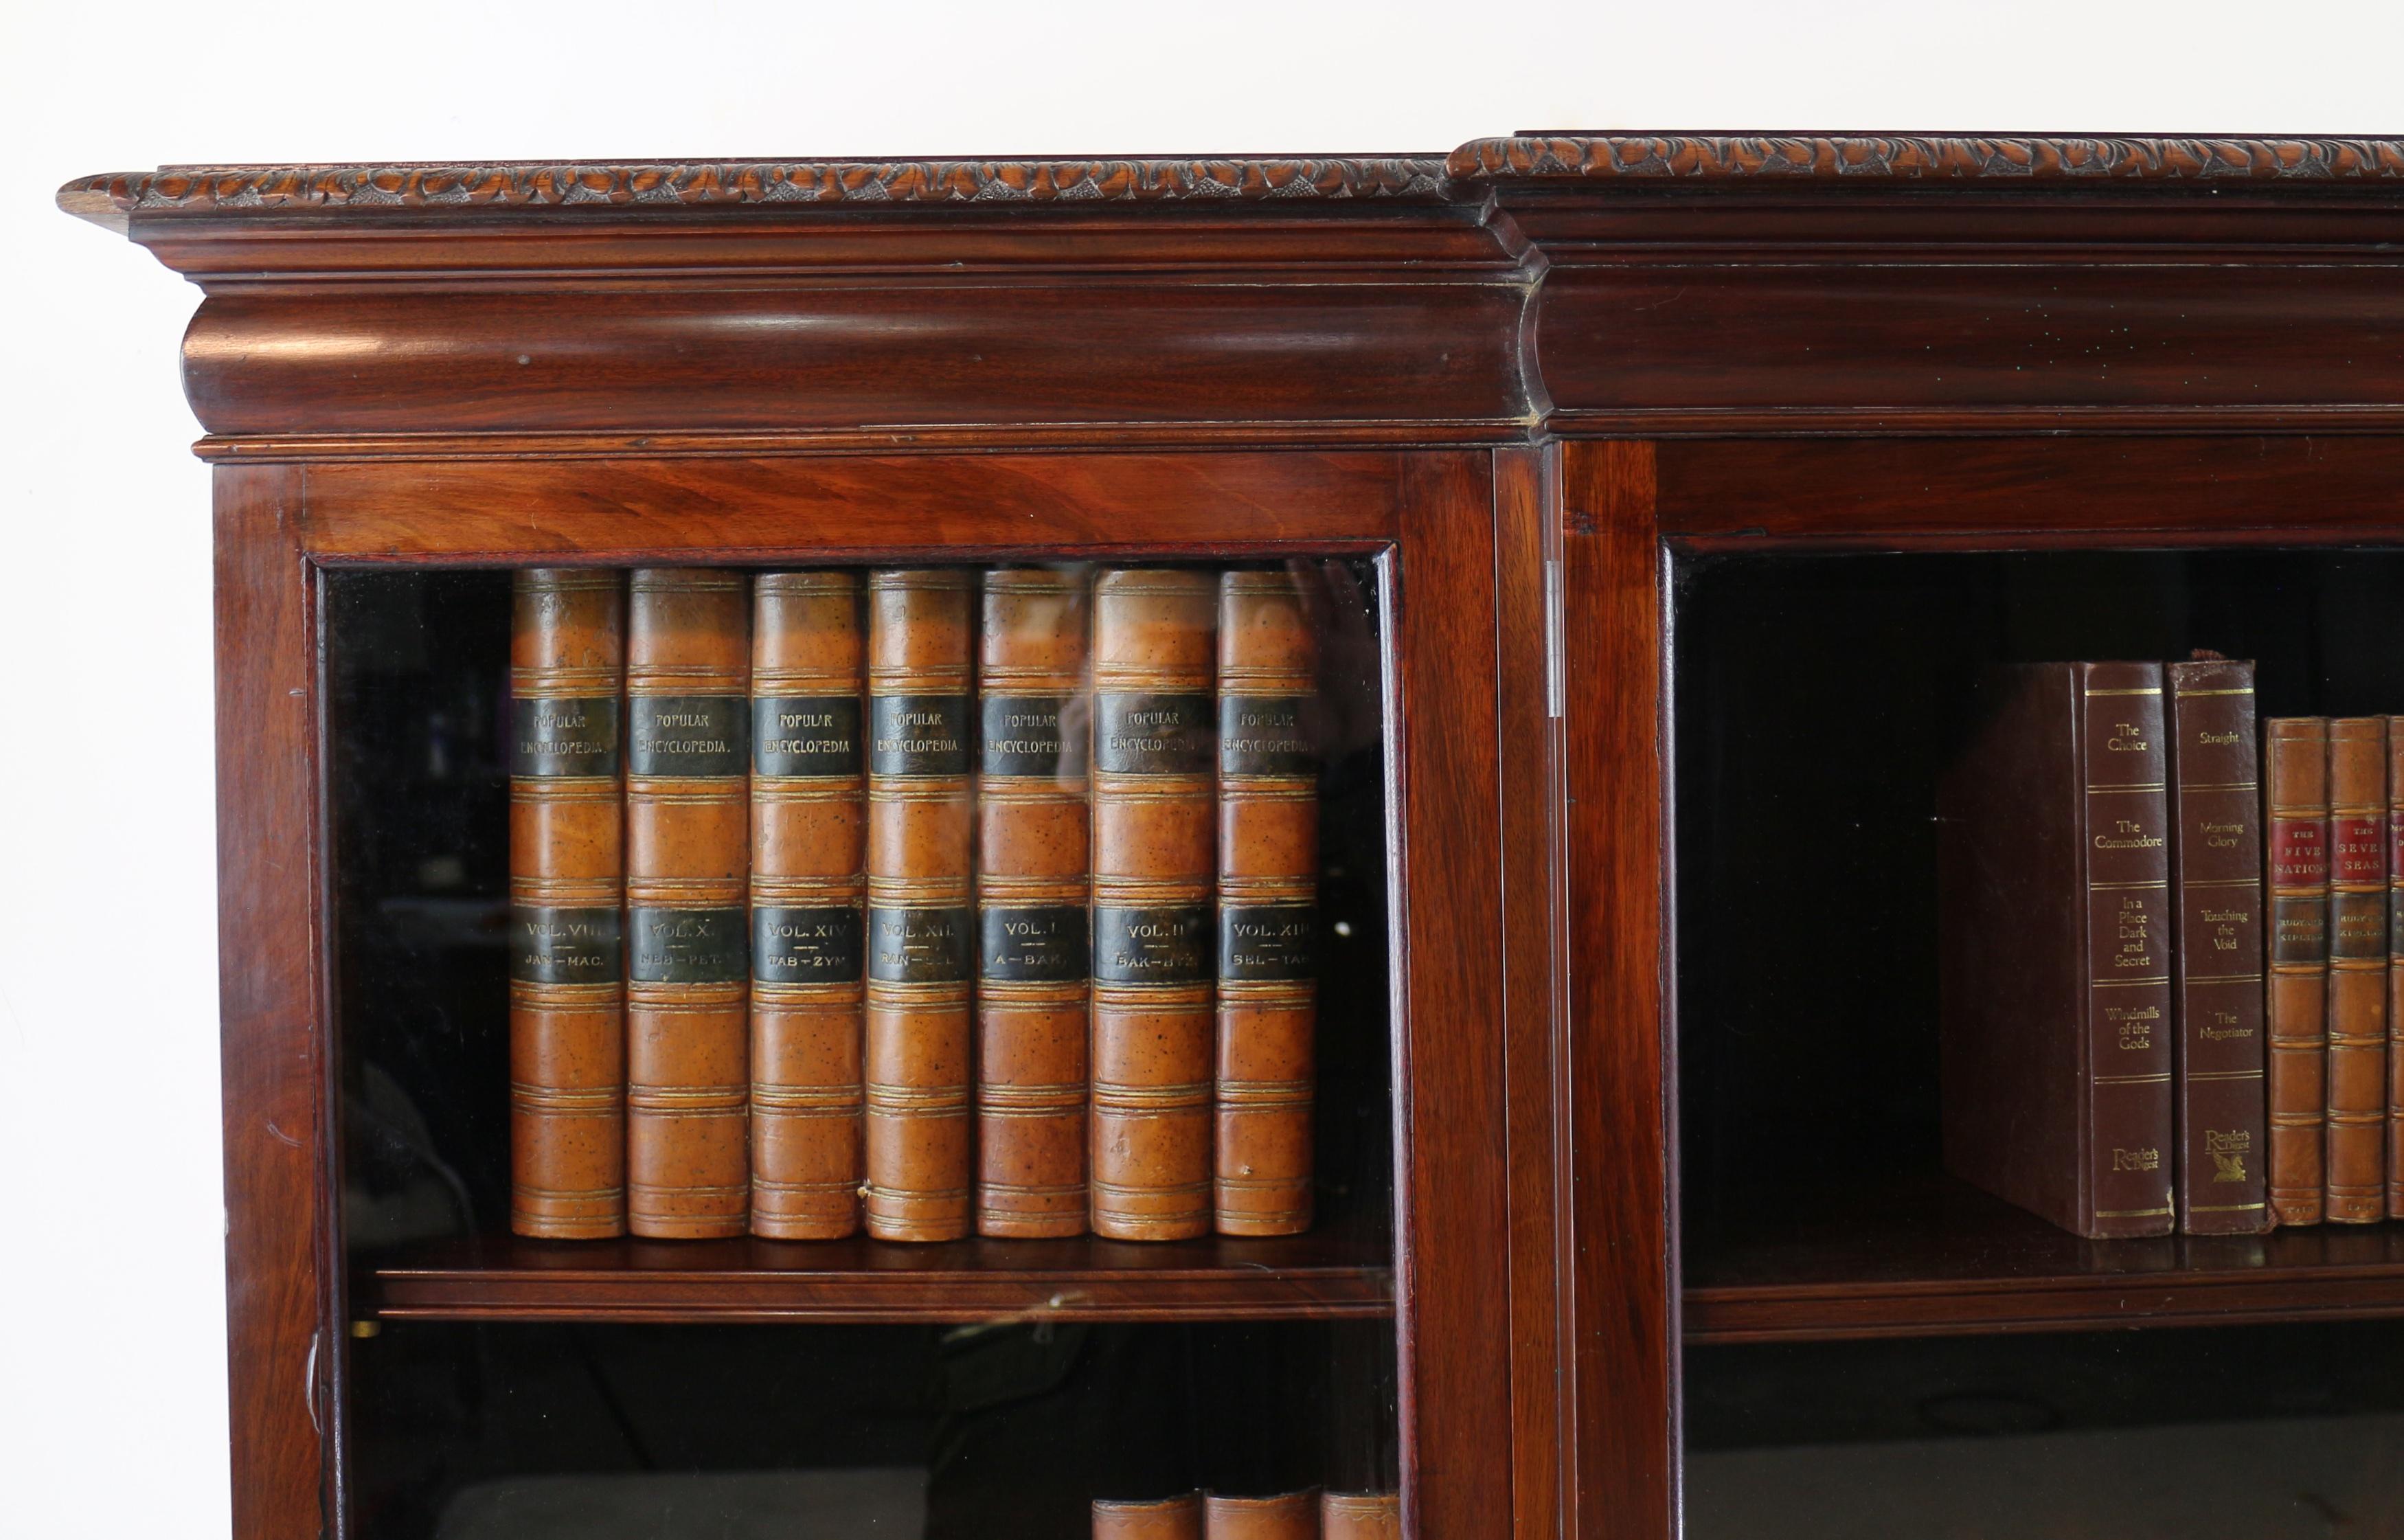 Chippendale Antique English Victorian Solid Mahogany Carved Glazed Breakfront Dwarf Bookcase